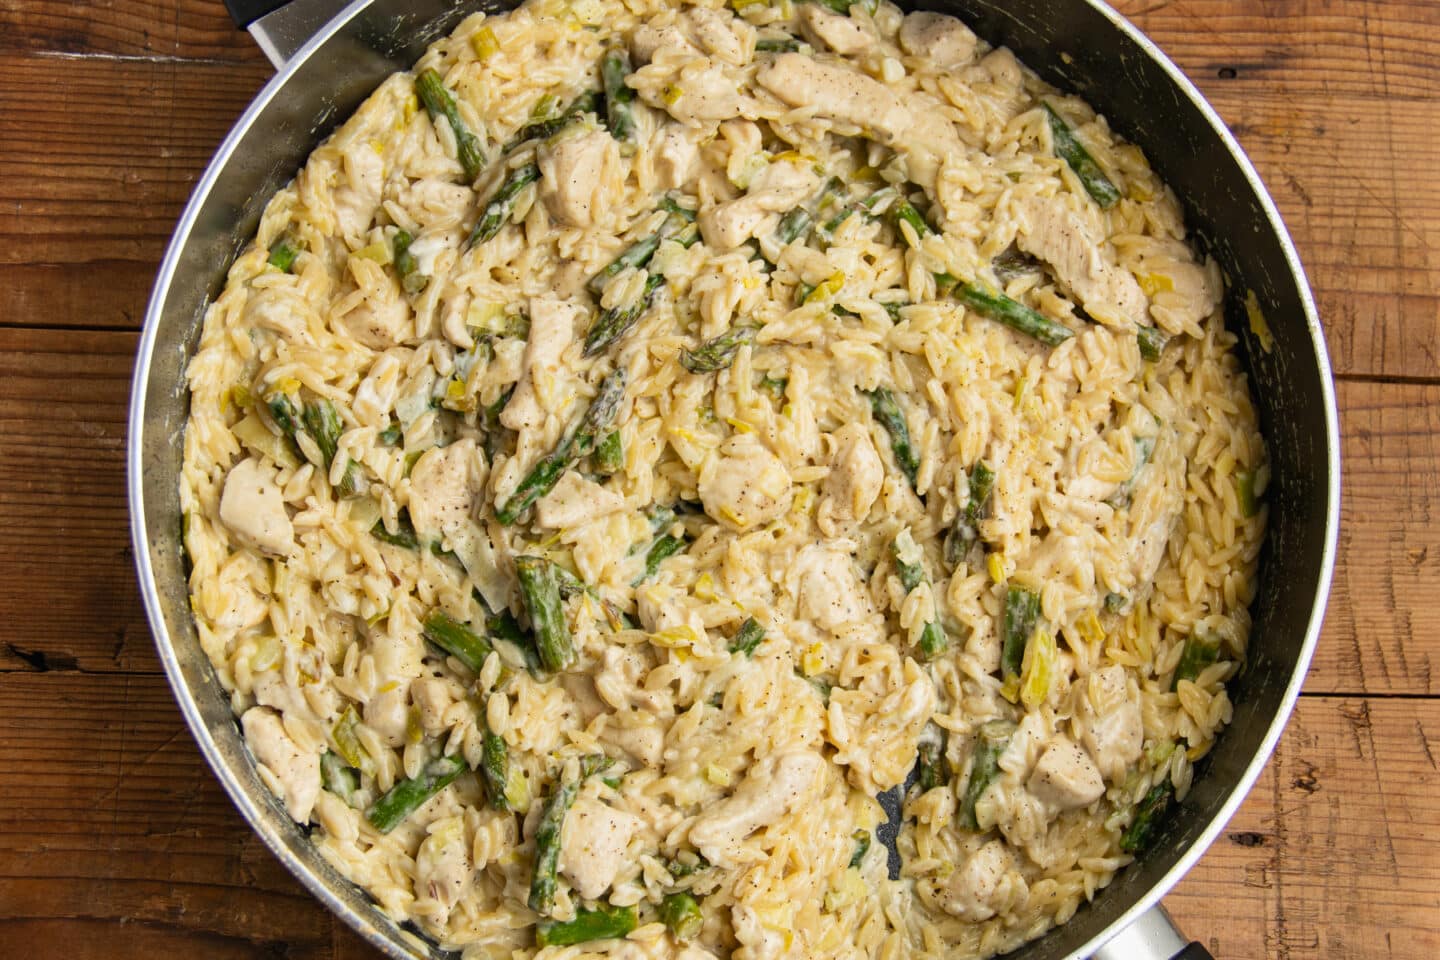 This is a picture of the skillet with the cheese, chicken and asparagus added.